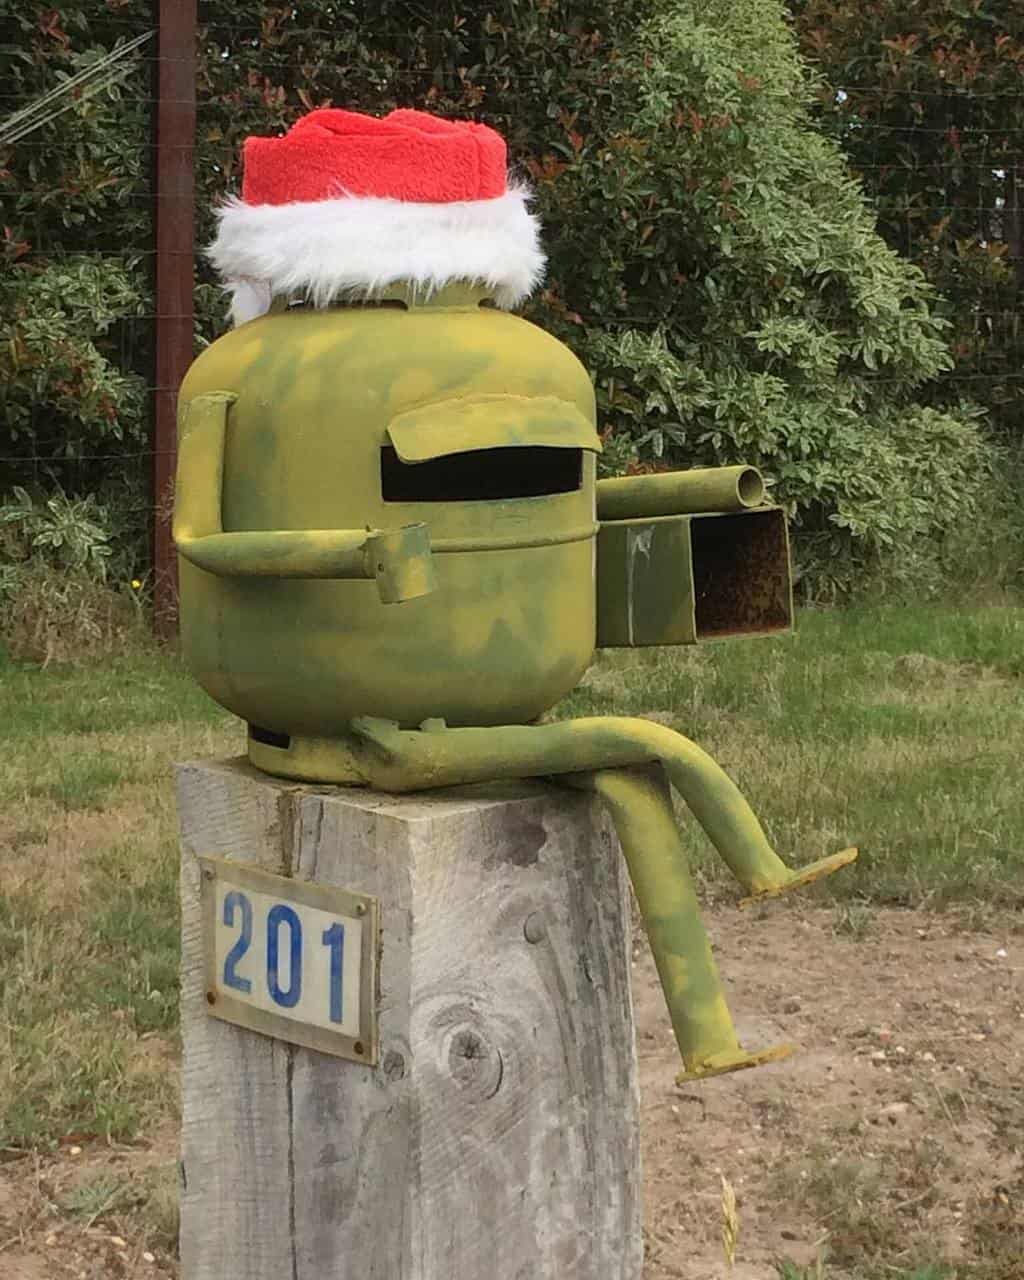 Happy Aussie Christmas from Aussie Letterboxes!